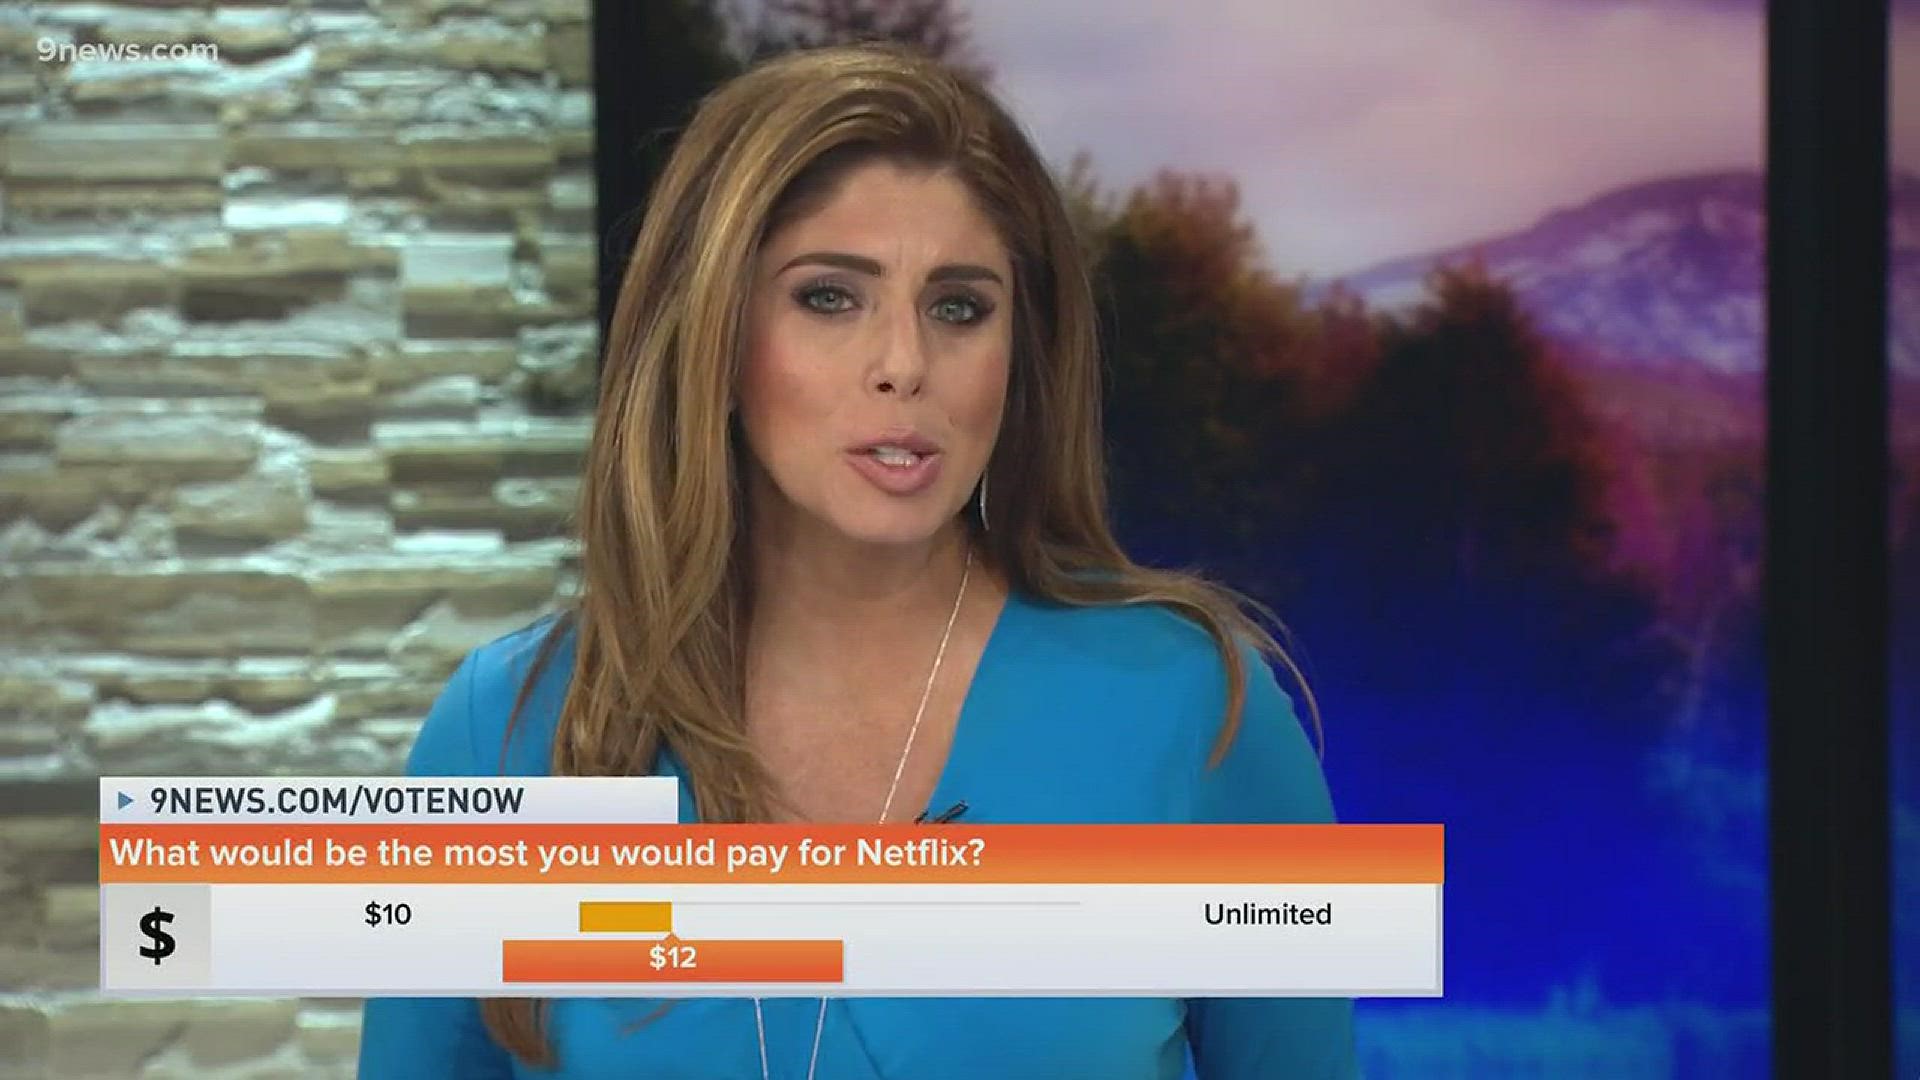 Netflix has announced that it plans to raise the monthly price of its streaming service for all of its customers. The 9news morning team asks viewers how much they would be willing to pay for the streaming service.